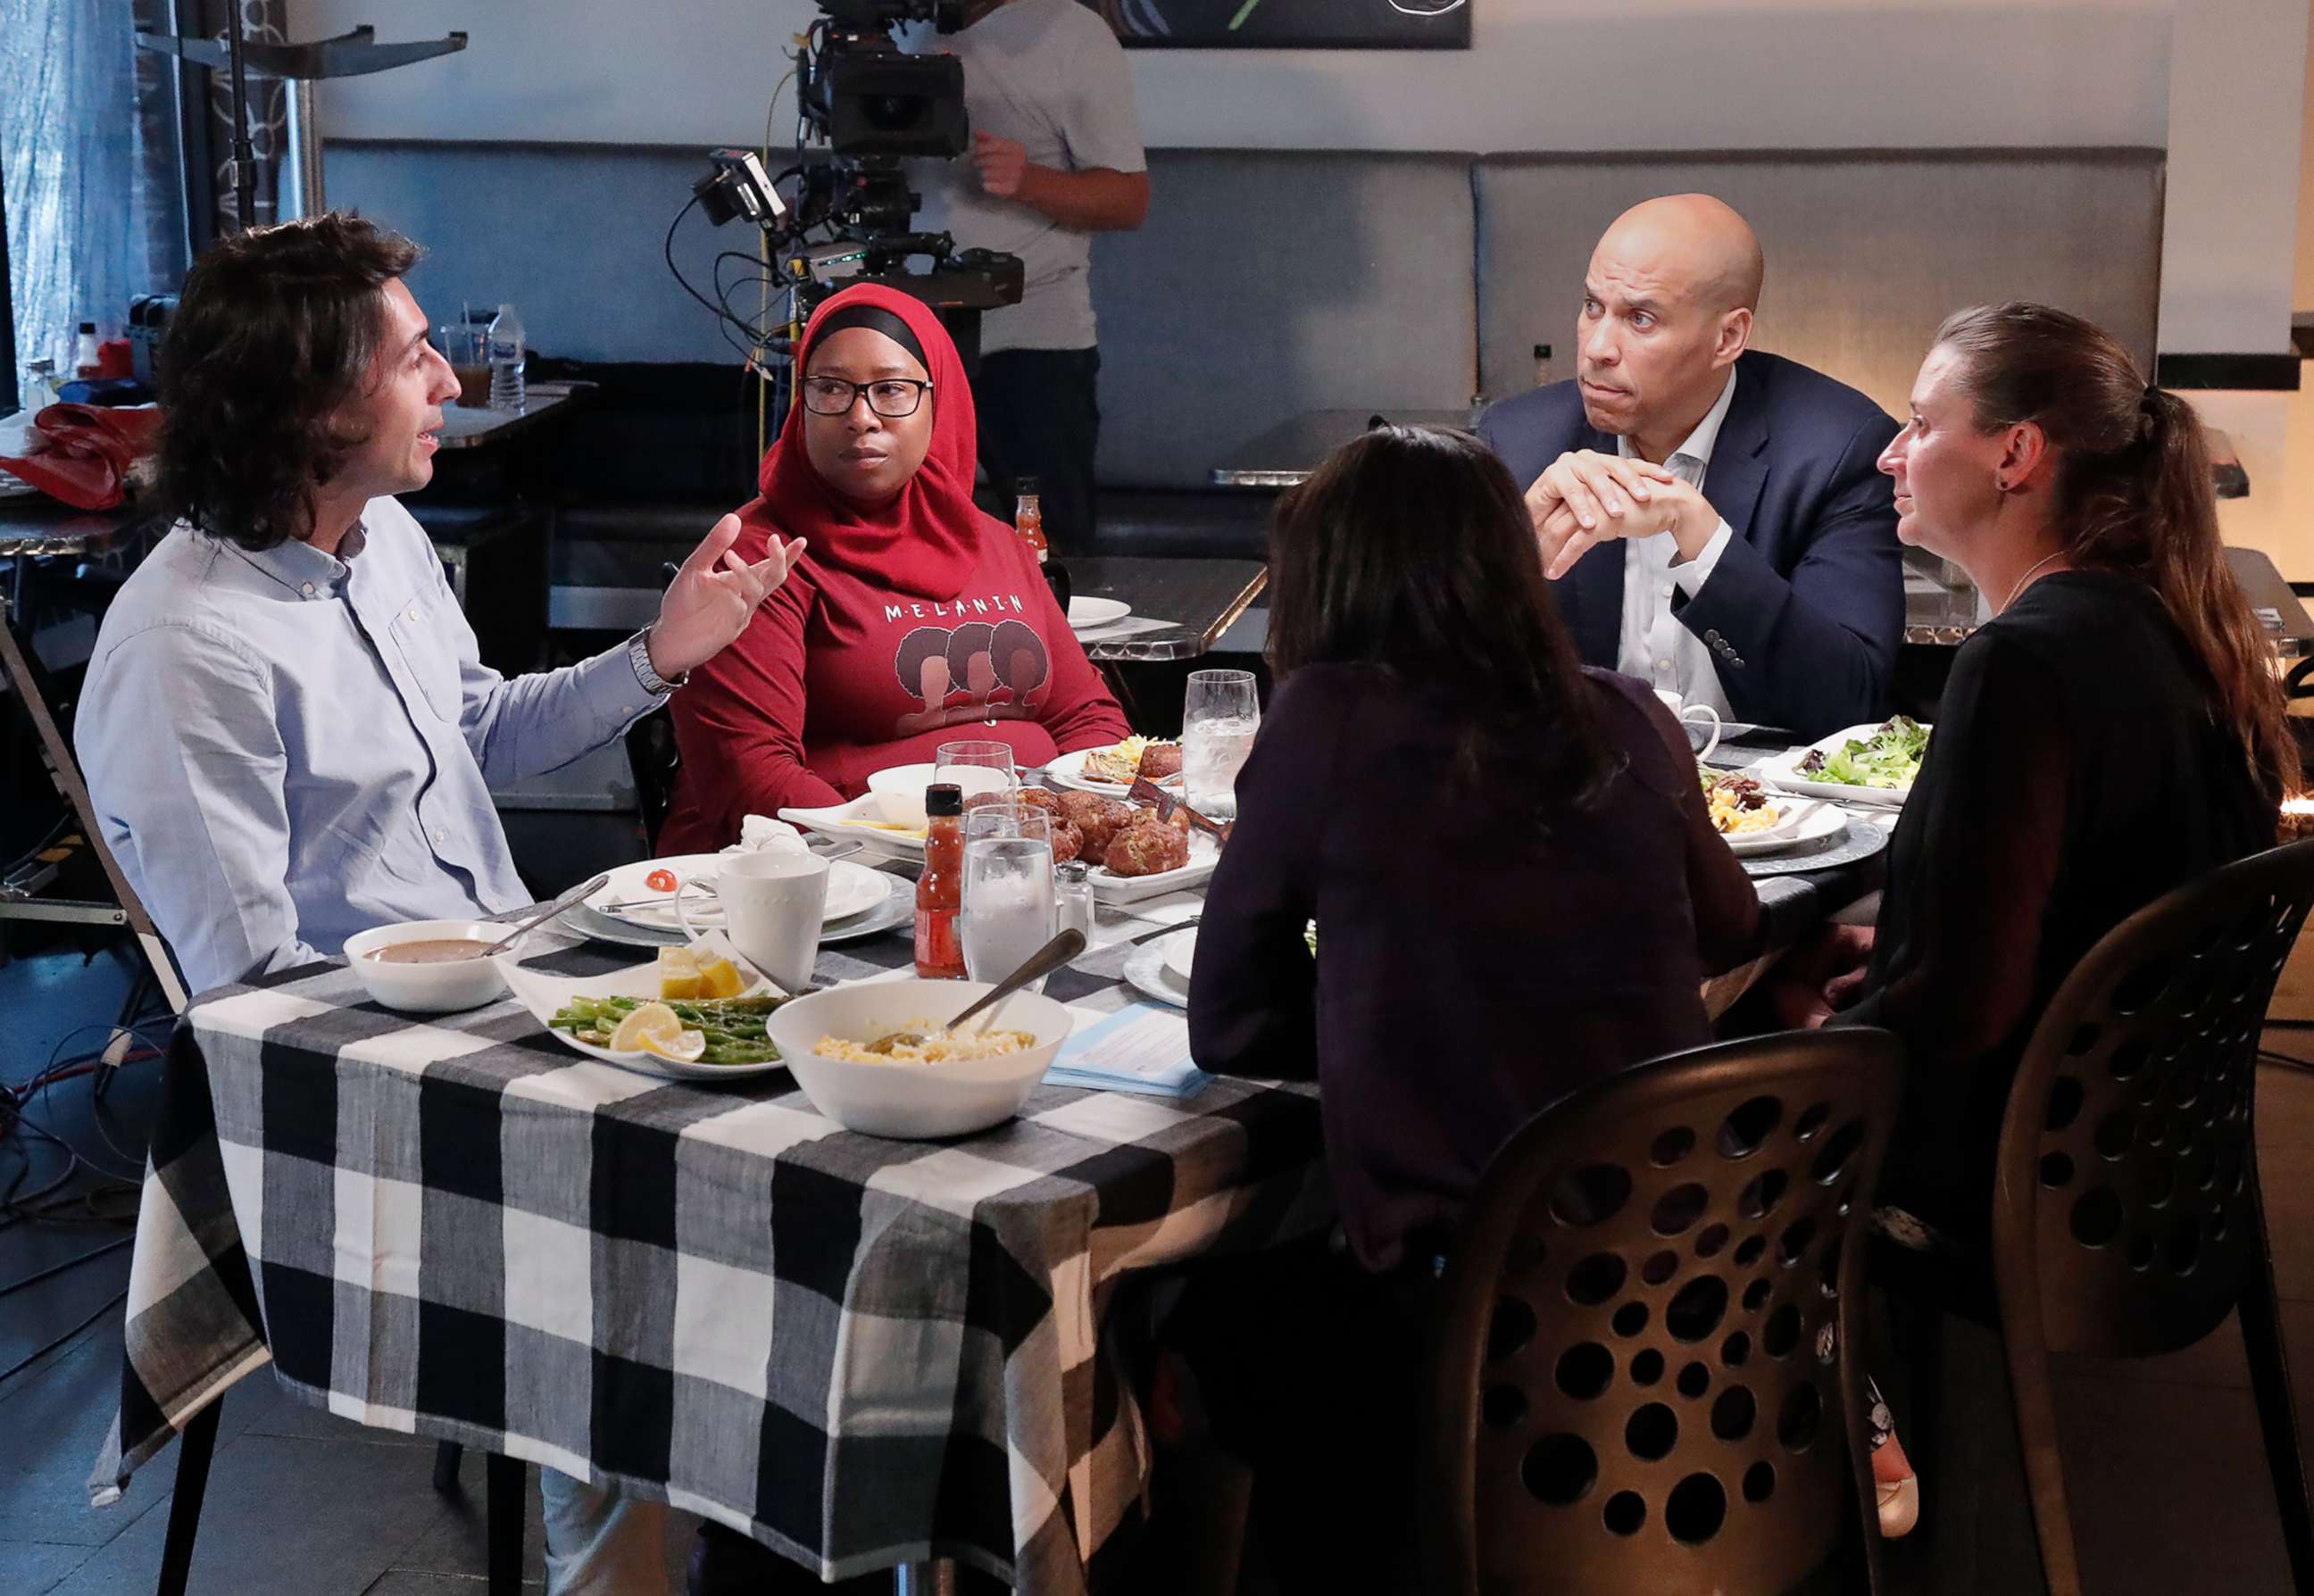 PHOTO: Bijan Roghanchi,left asks a question during a dinner with other voters and Democratic presidential candidate Cory Booker at a restaurant in Newark, N.J.